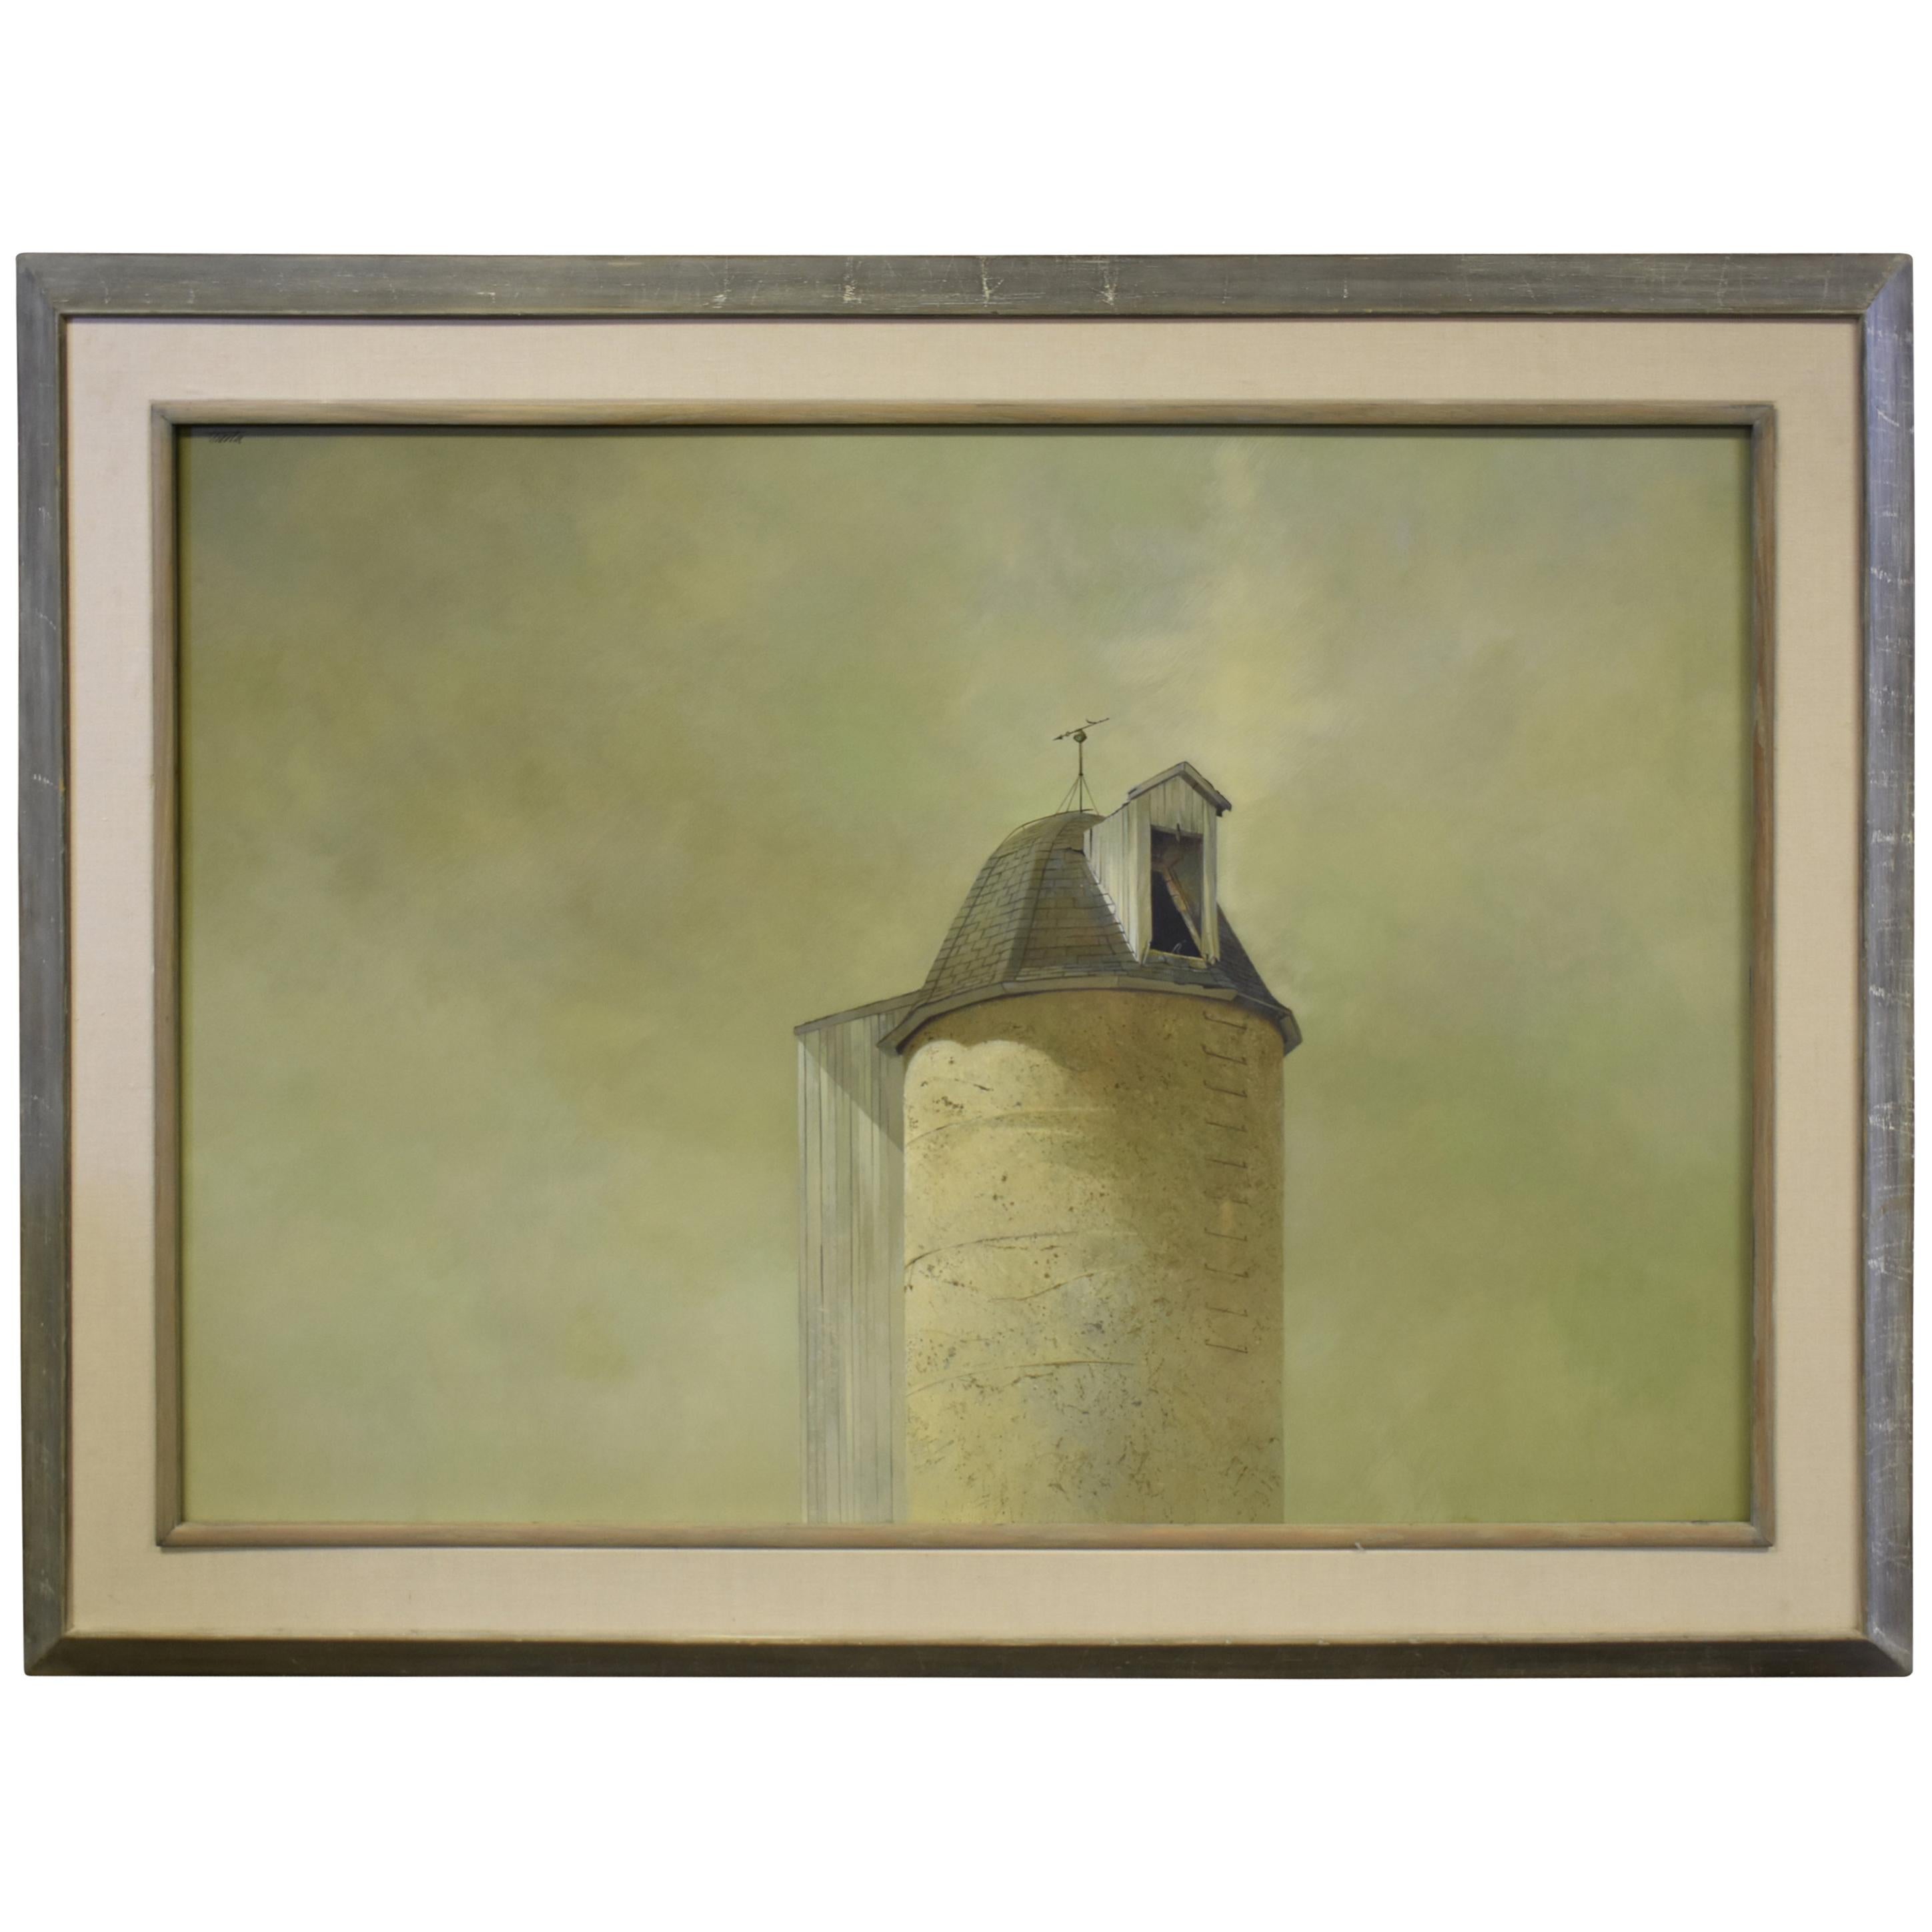 Original Painting Oil on Board Richard Treaster Silo with Weathervane